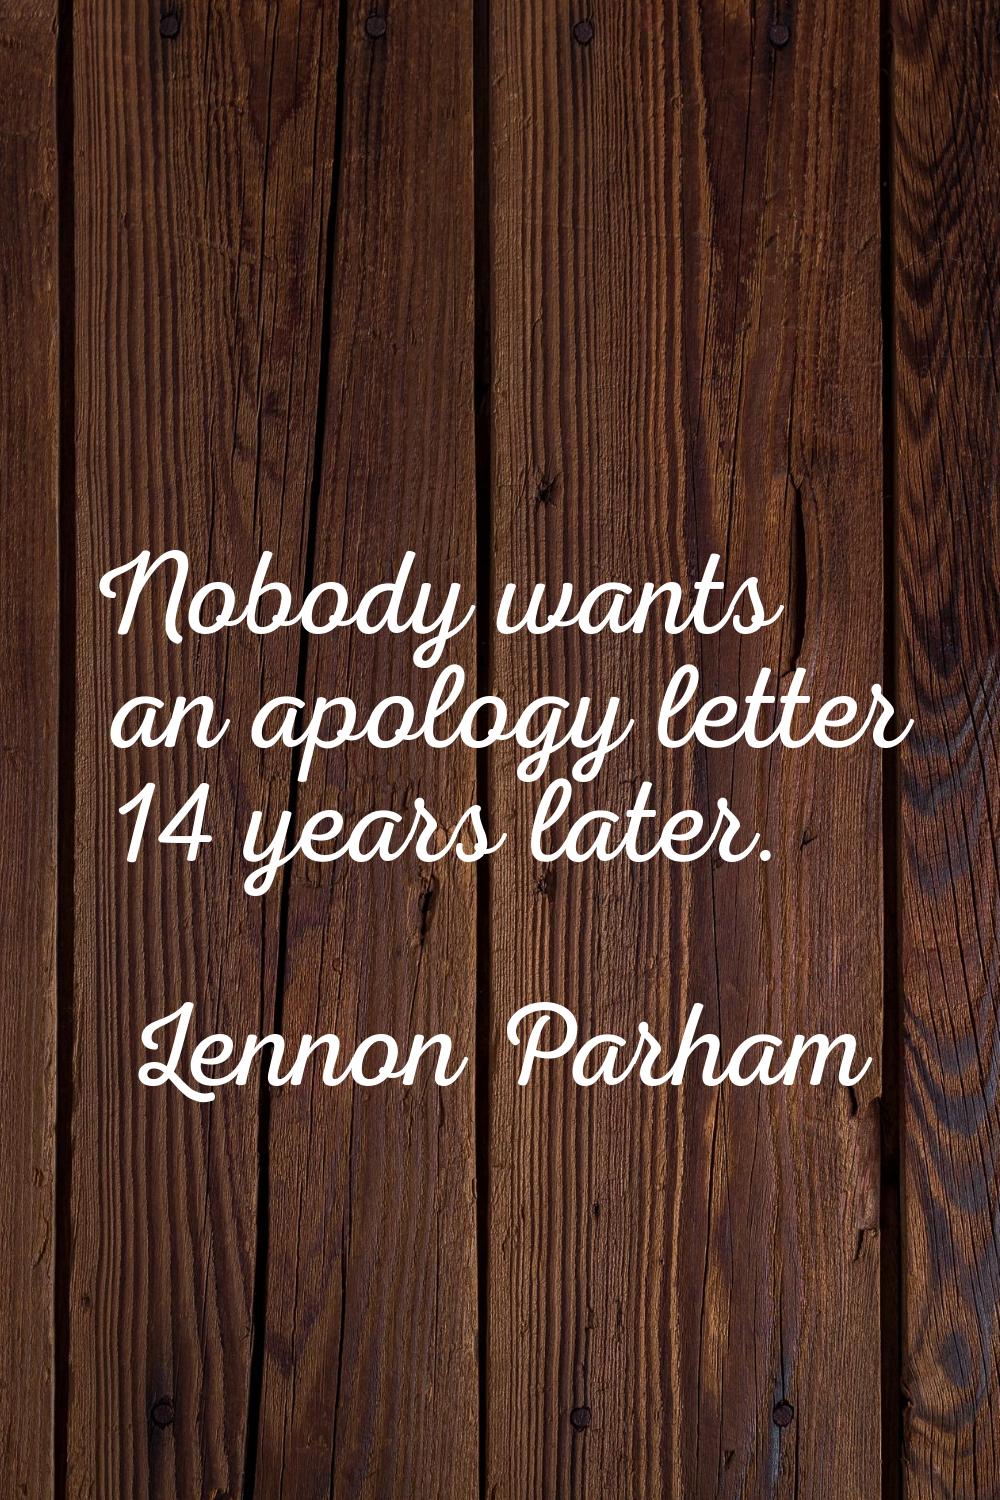 Nobody wants an apology letter 14 years later.